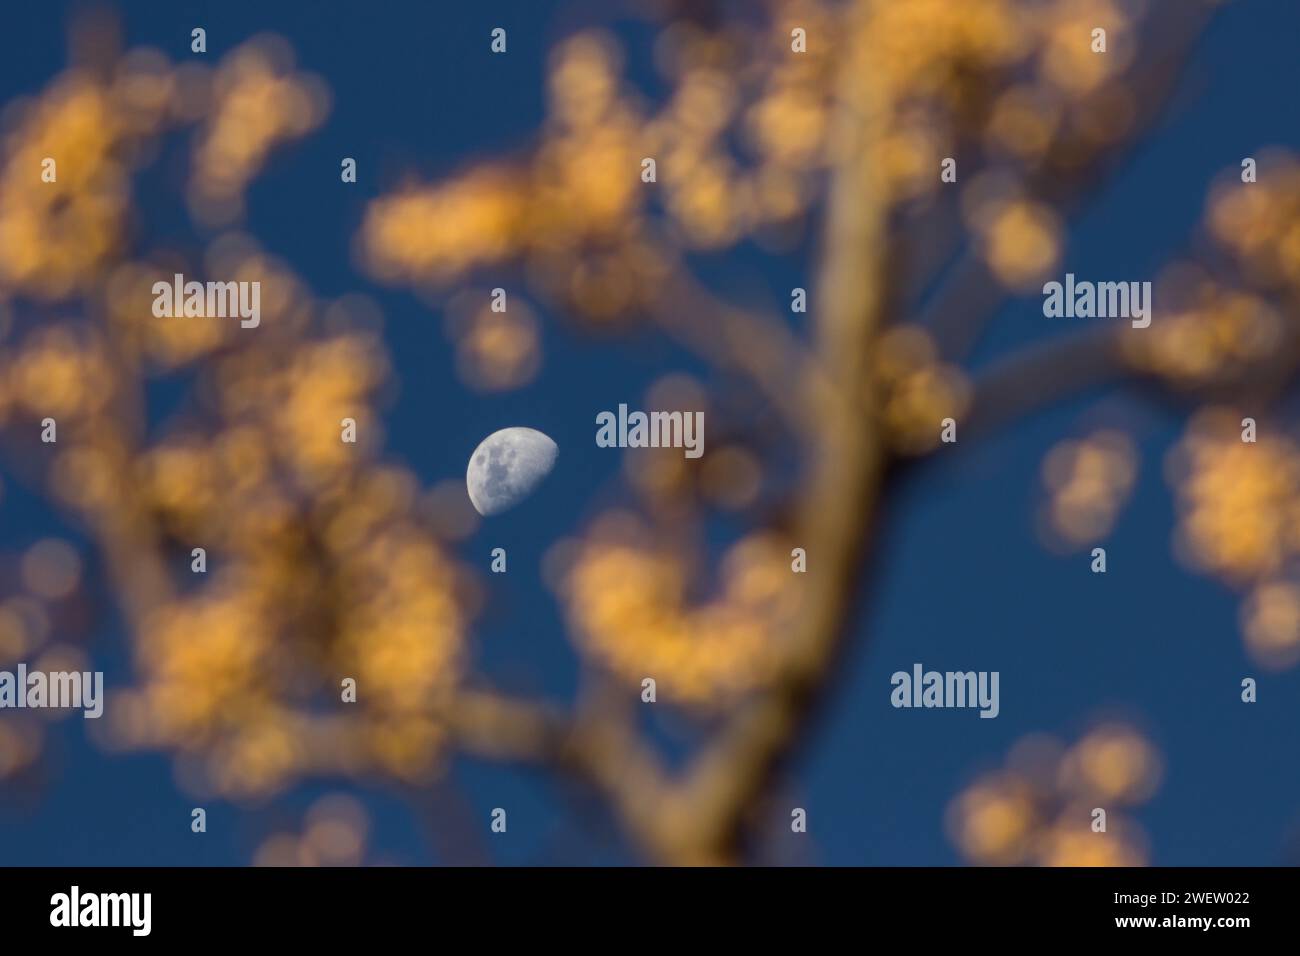 The moon as seen through the branches of a Seringa tree, filled with yellow berries. Stock Photo